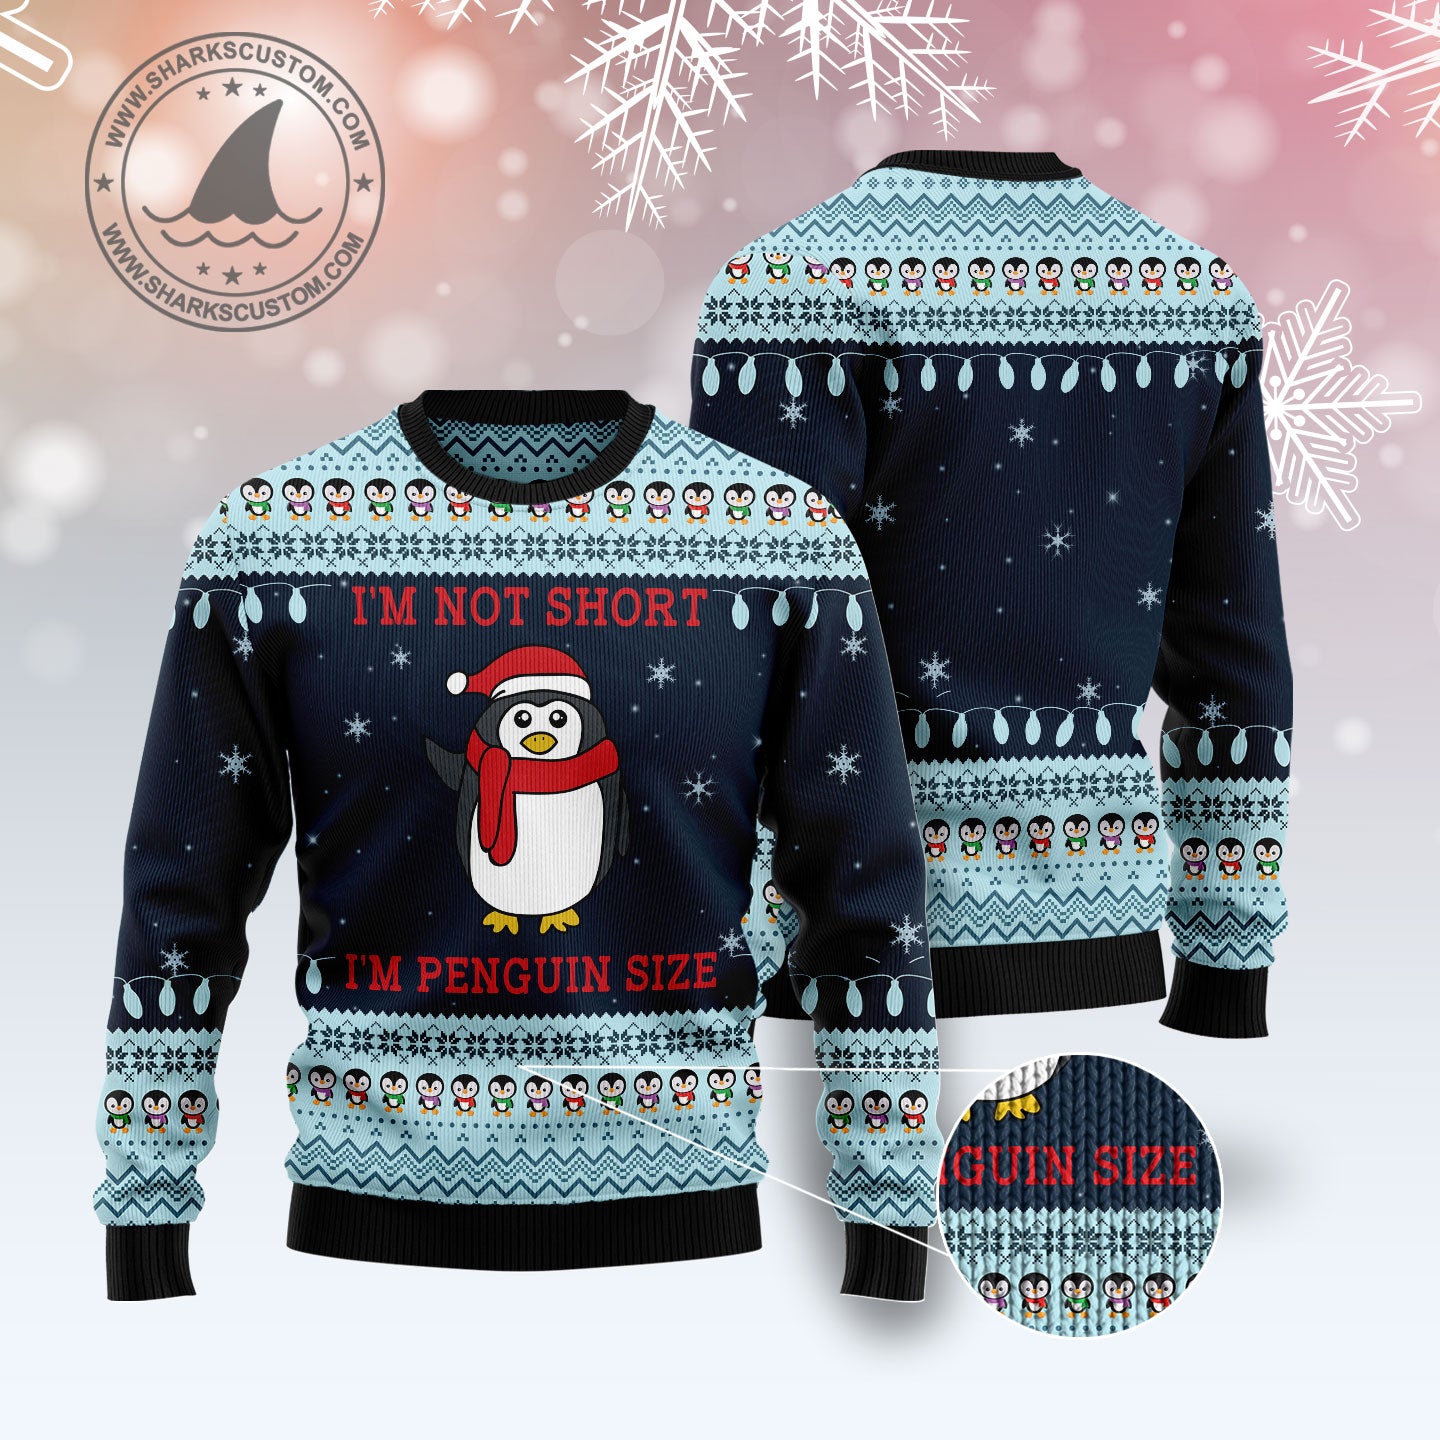 Not Short Penguin Size G5122 unisex womens & mens, couples matching, friends, penguin lover, funny family ugly christmas holiday sweater gifts (plus size available)